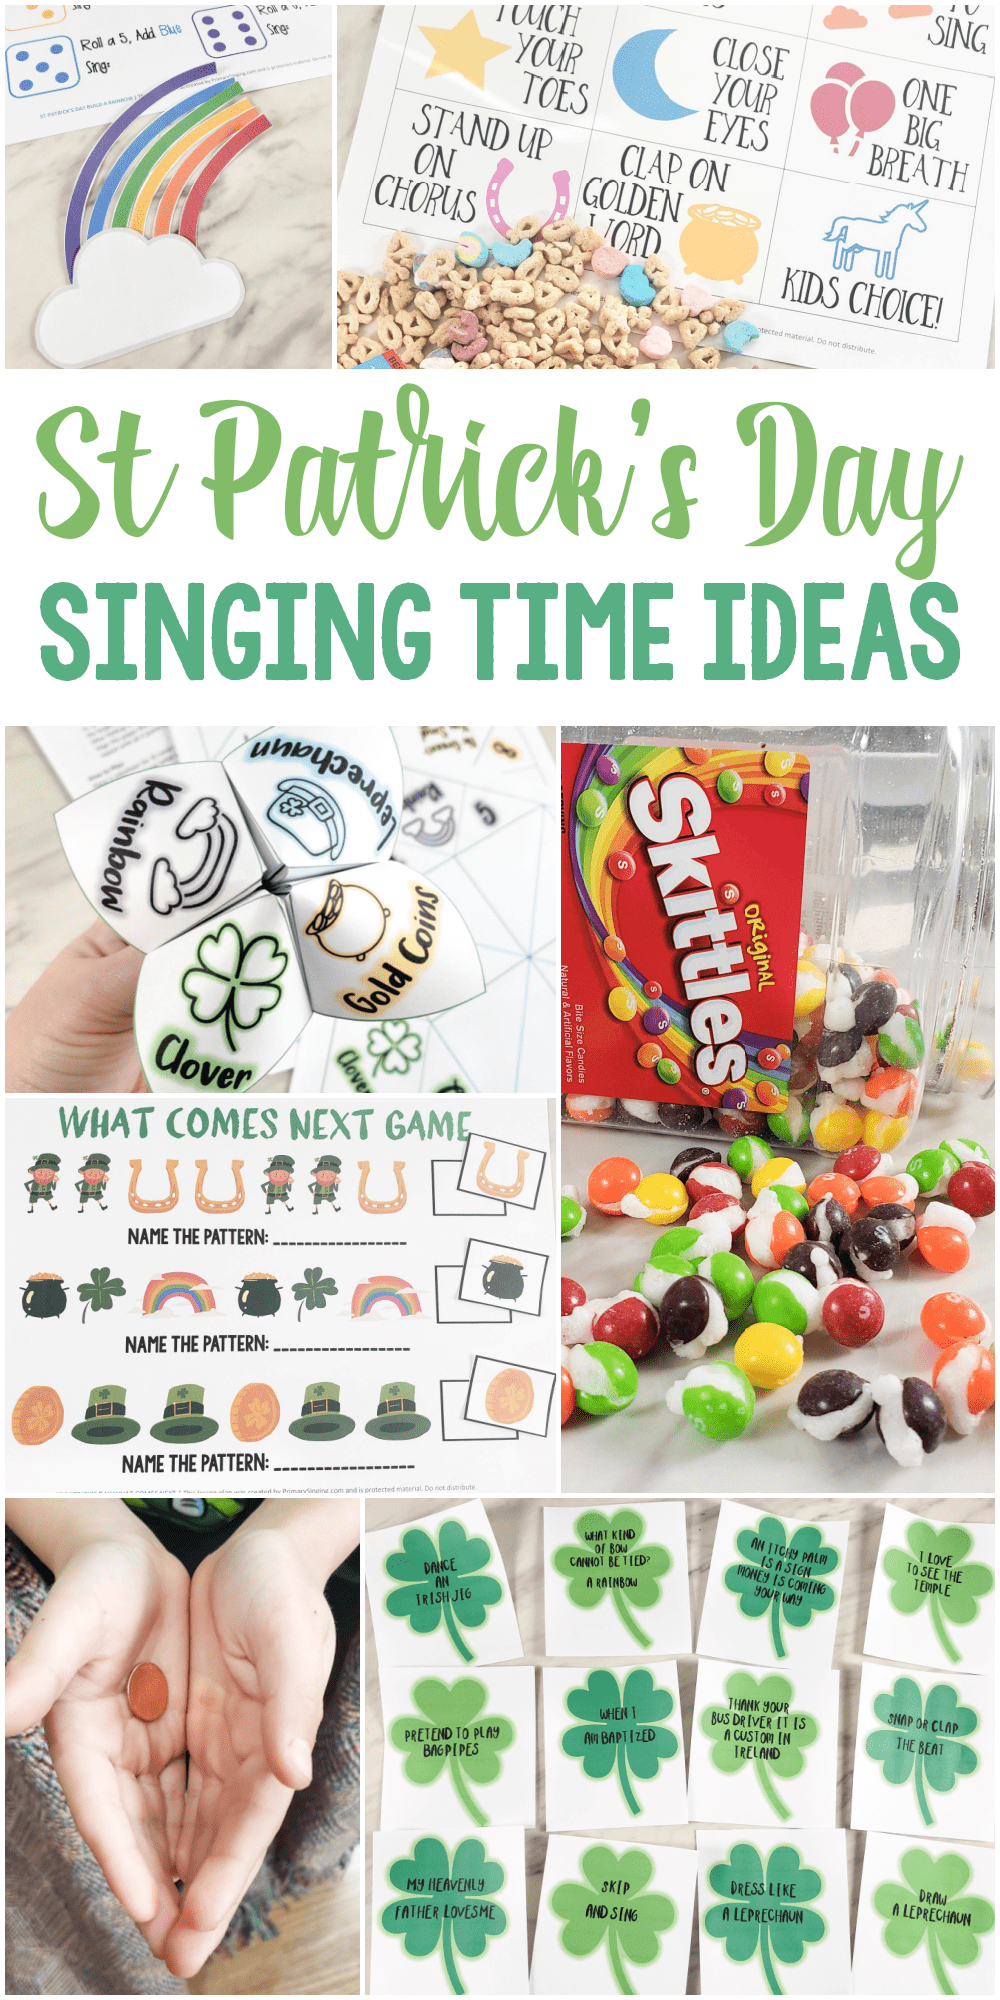 45 St Patrick's Day Primary Songs Singing time ideas for Primary Music Leaders St Patricks Day Singing Time Ideas